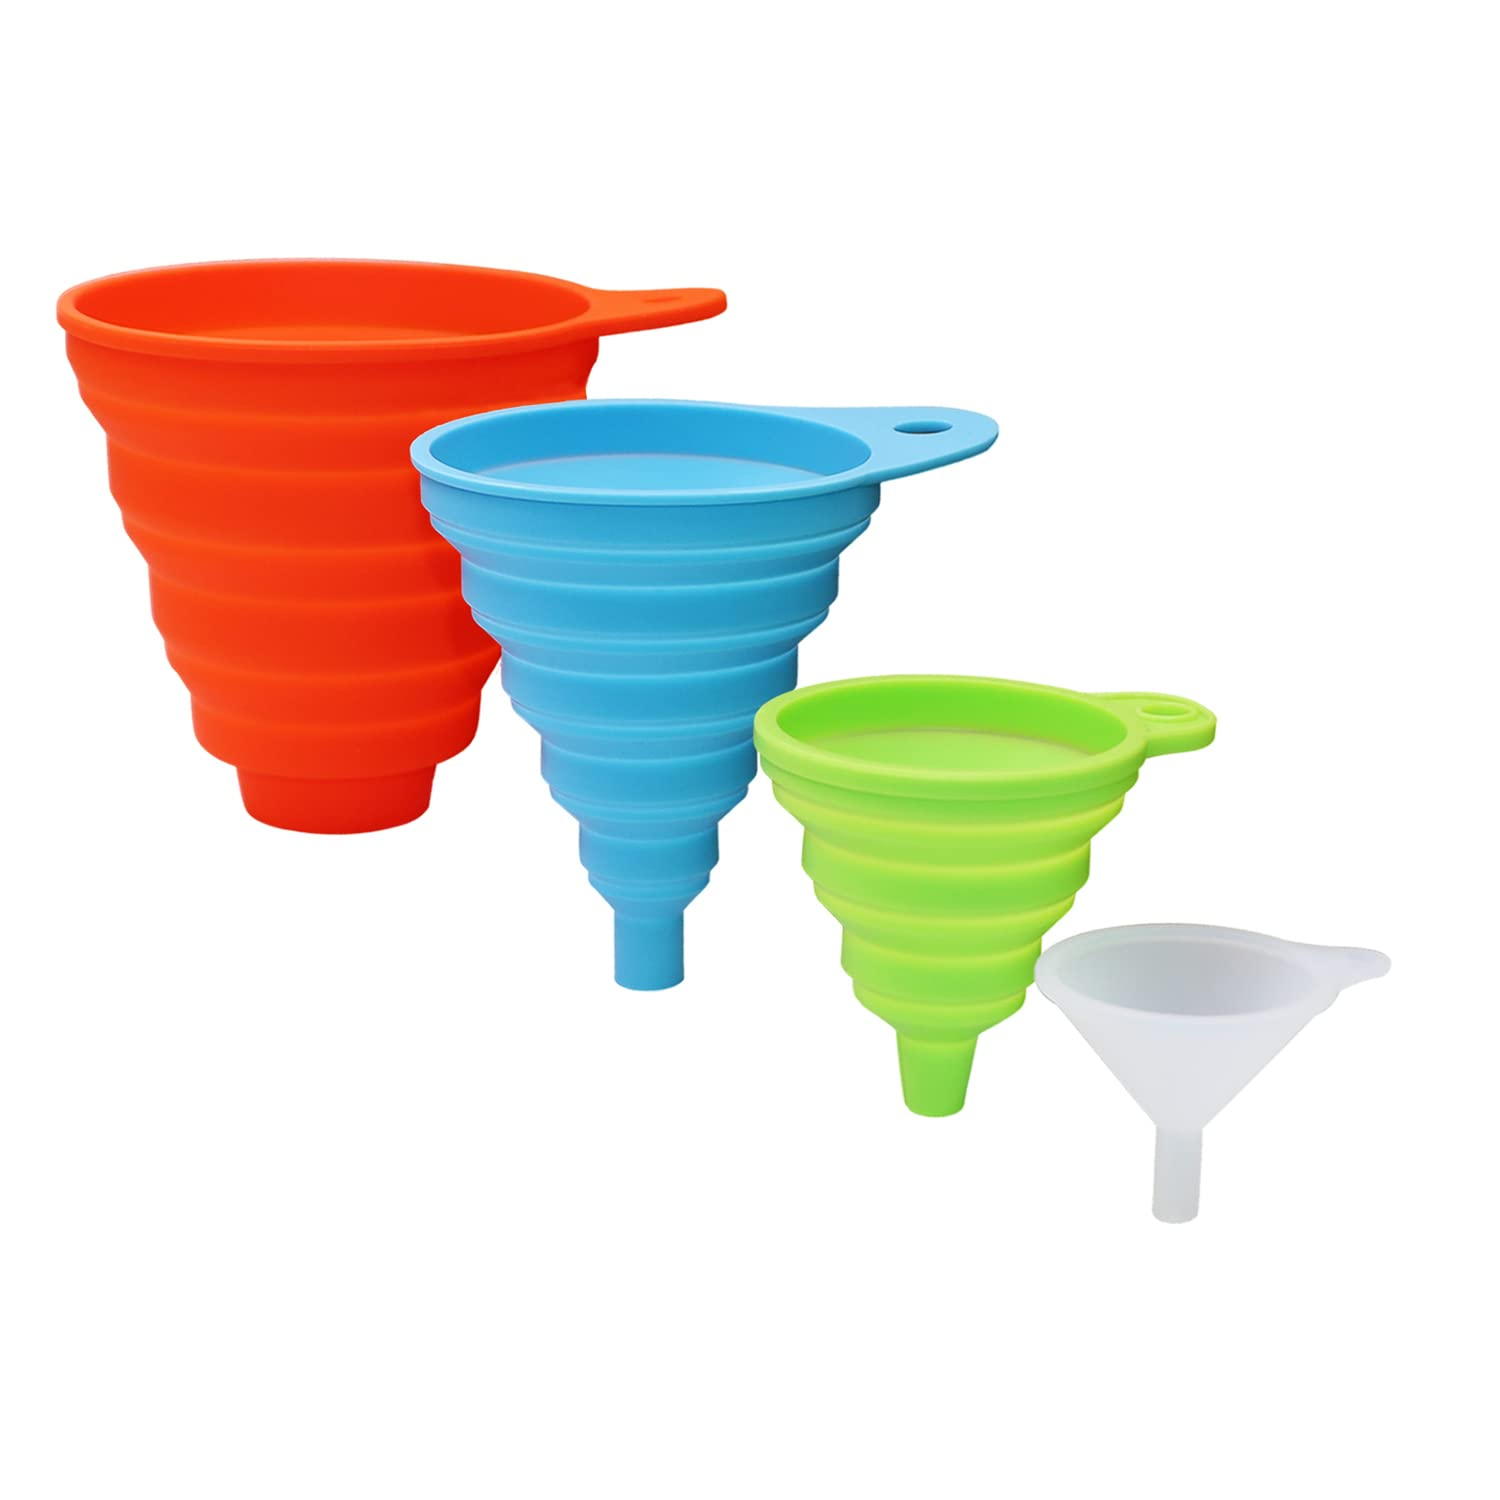 Collapsible Funnels for Kitchen Use, Mini Small Medium and Large 4 Foldable Funnel Sets for Filling Bottles Canning and Jar, Food Kitchen Items, BPA Free, Heat Resistant